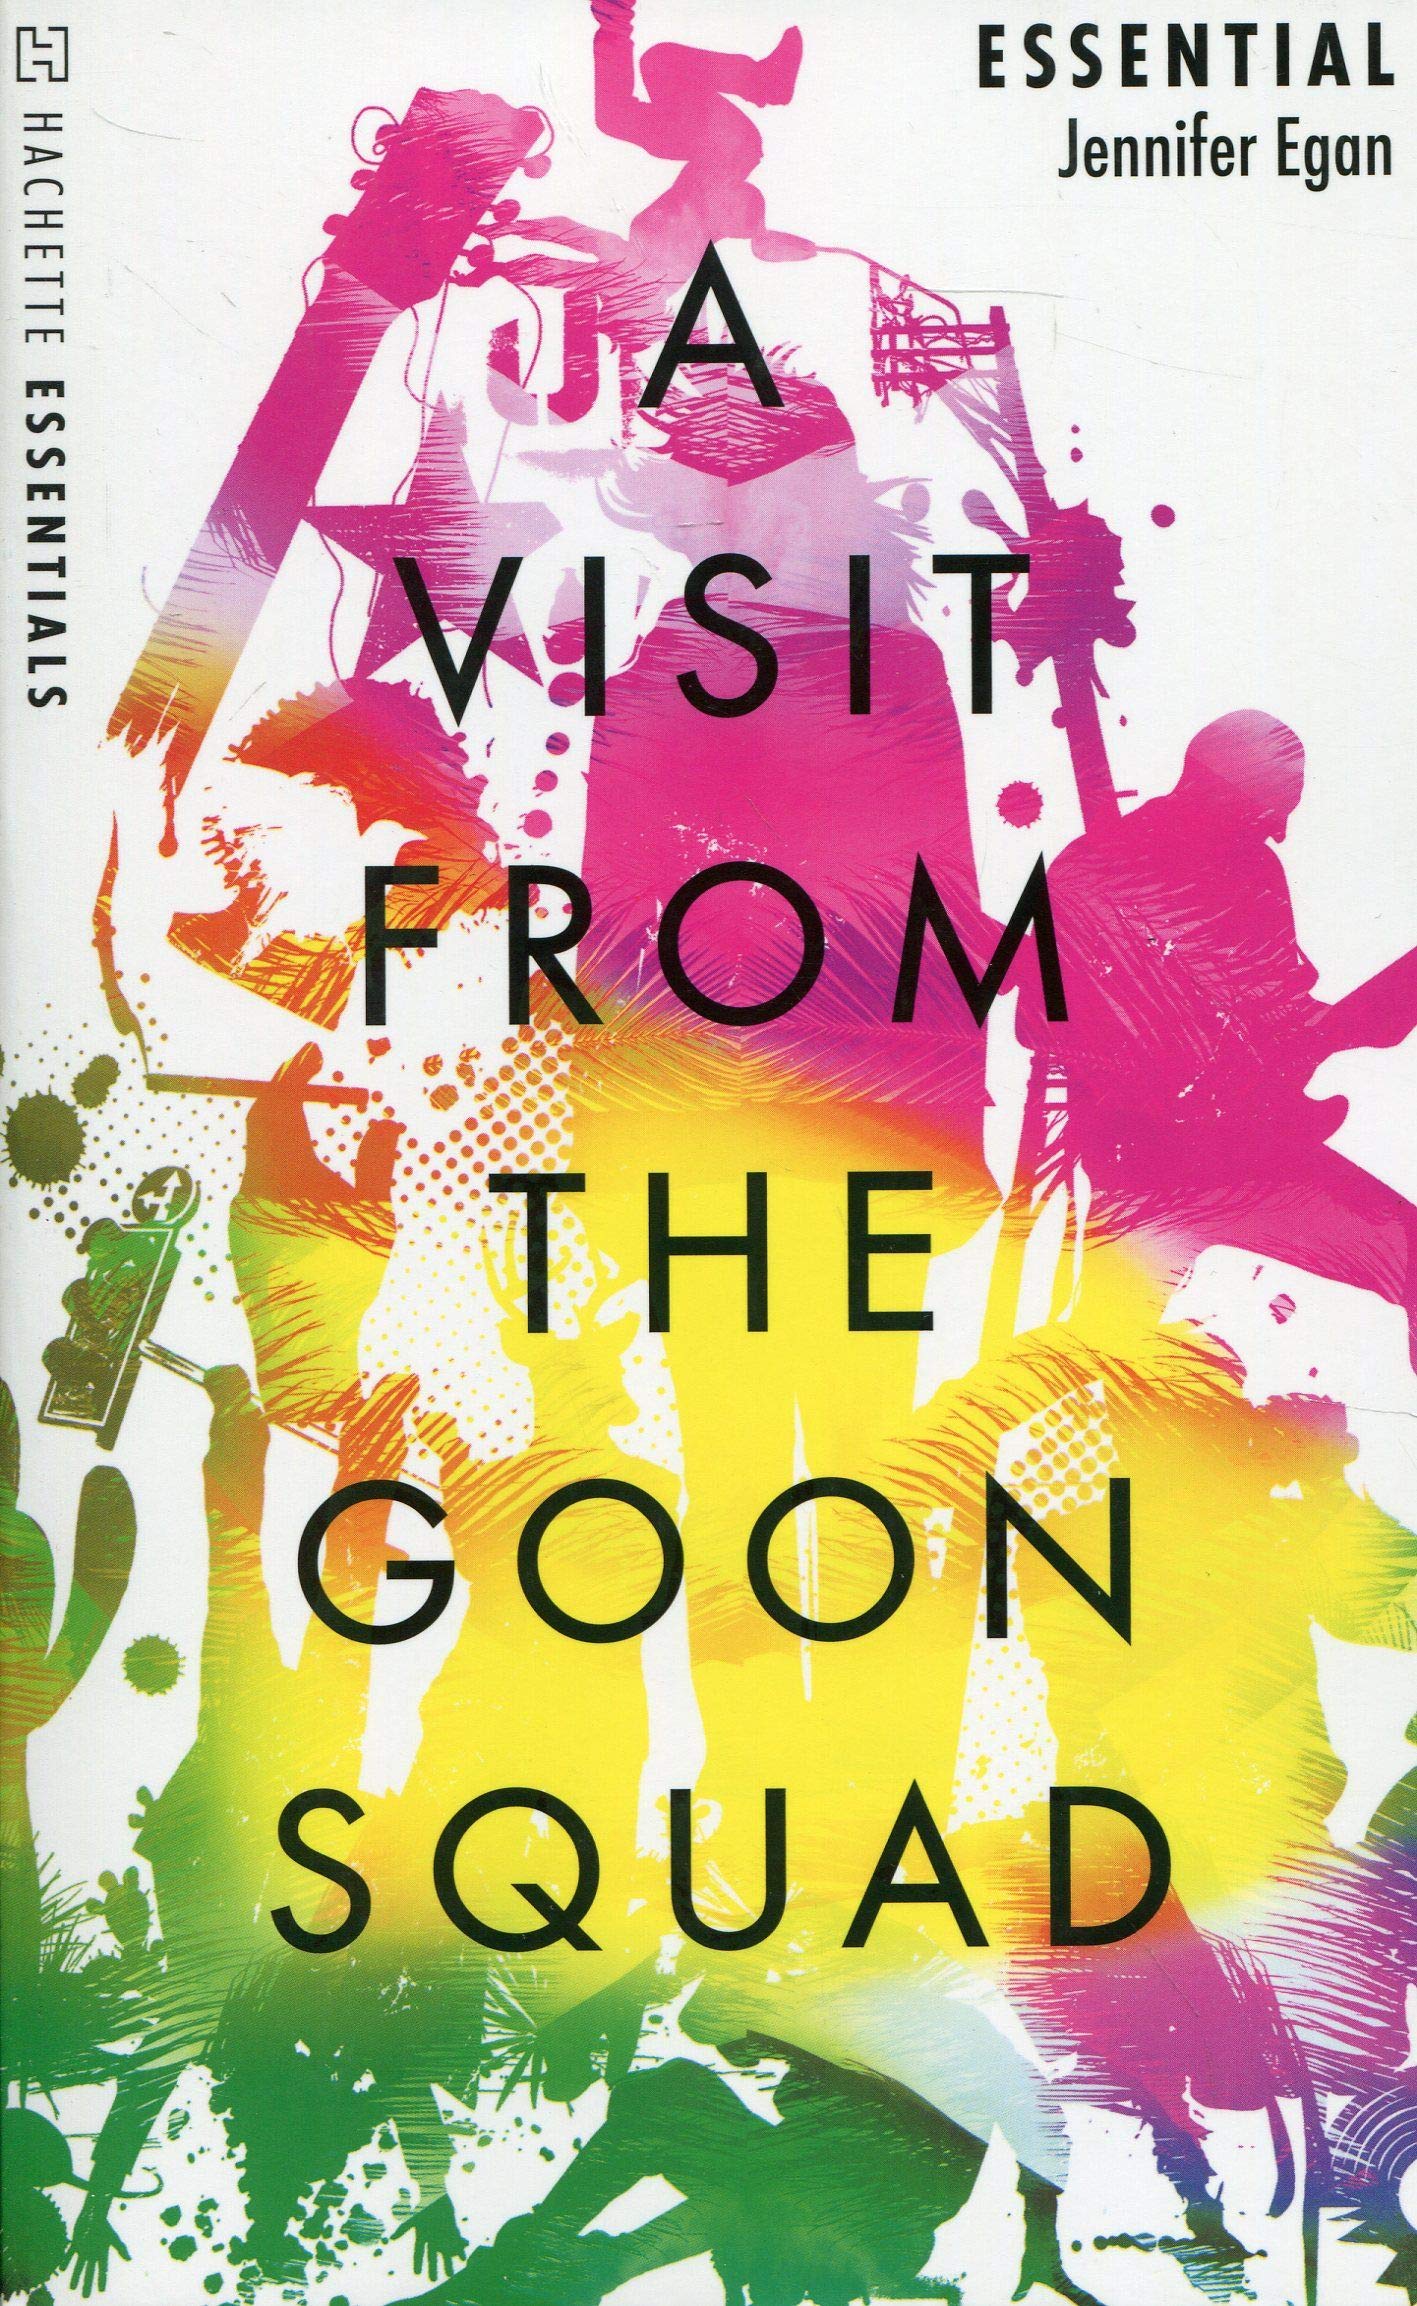 a visit from the goon squad isbn